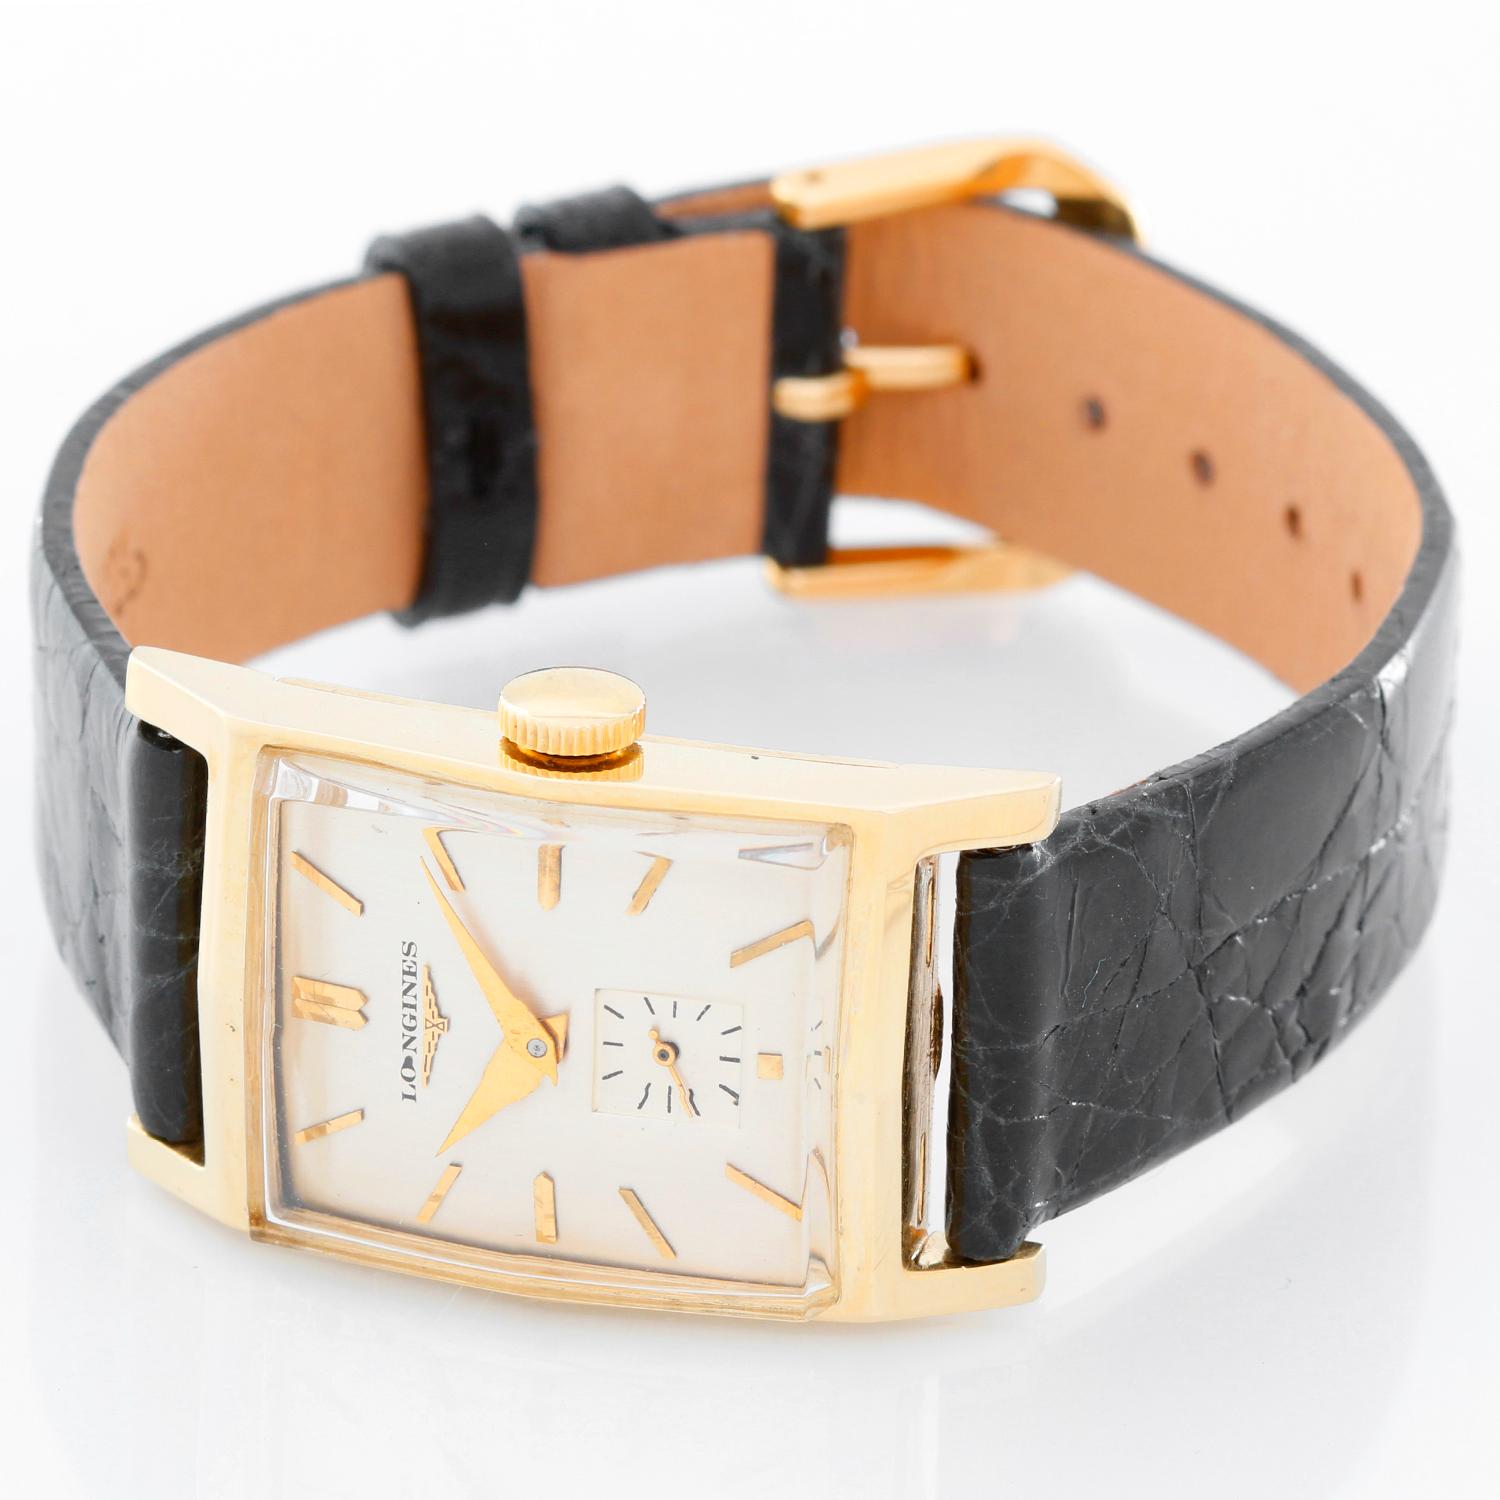 Vintage Men's/Ladies Longines 14K Yellow Gold Watch - Manual winding. 14K Yellow gold ( 22 mm x 37 mm ). Silver colored dial with gold stick hour markers. Black strap band with buckle. Pre-owned with custom box. Circa 1940's-50's.